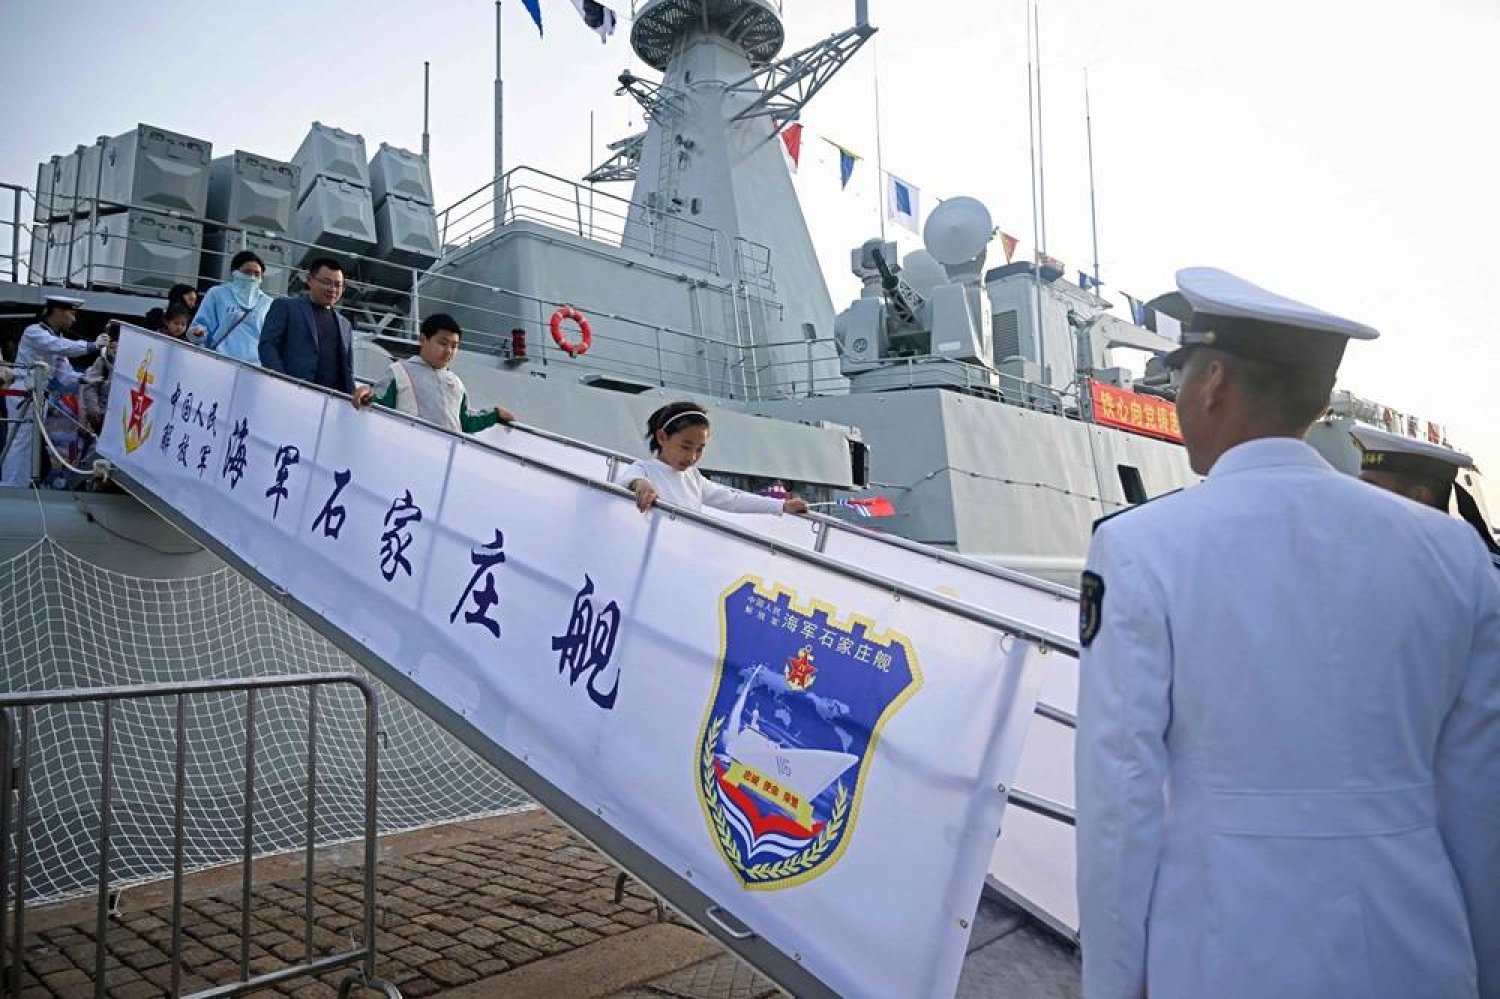  People step off gangway after their visiting Chinese Navy Shijianzhuang destroyer during a media tour organised by Chinese Navy at a port in Qingdao, China's Shandong province on April 20, 2024. (AFP) 